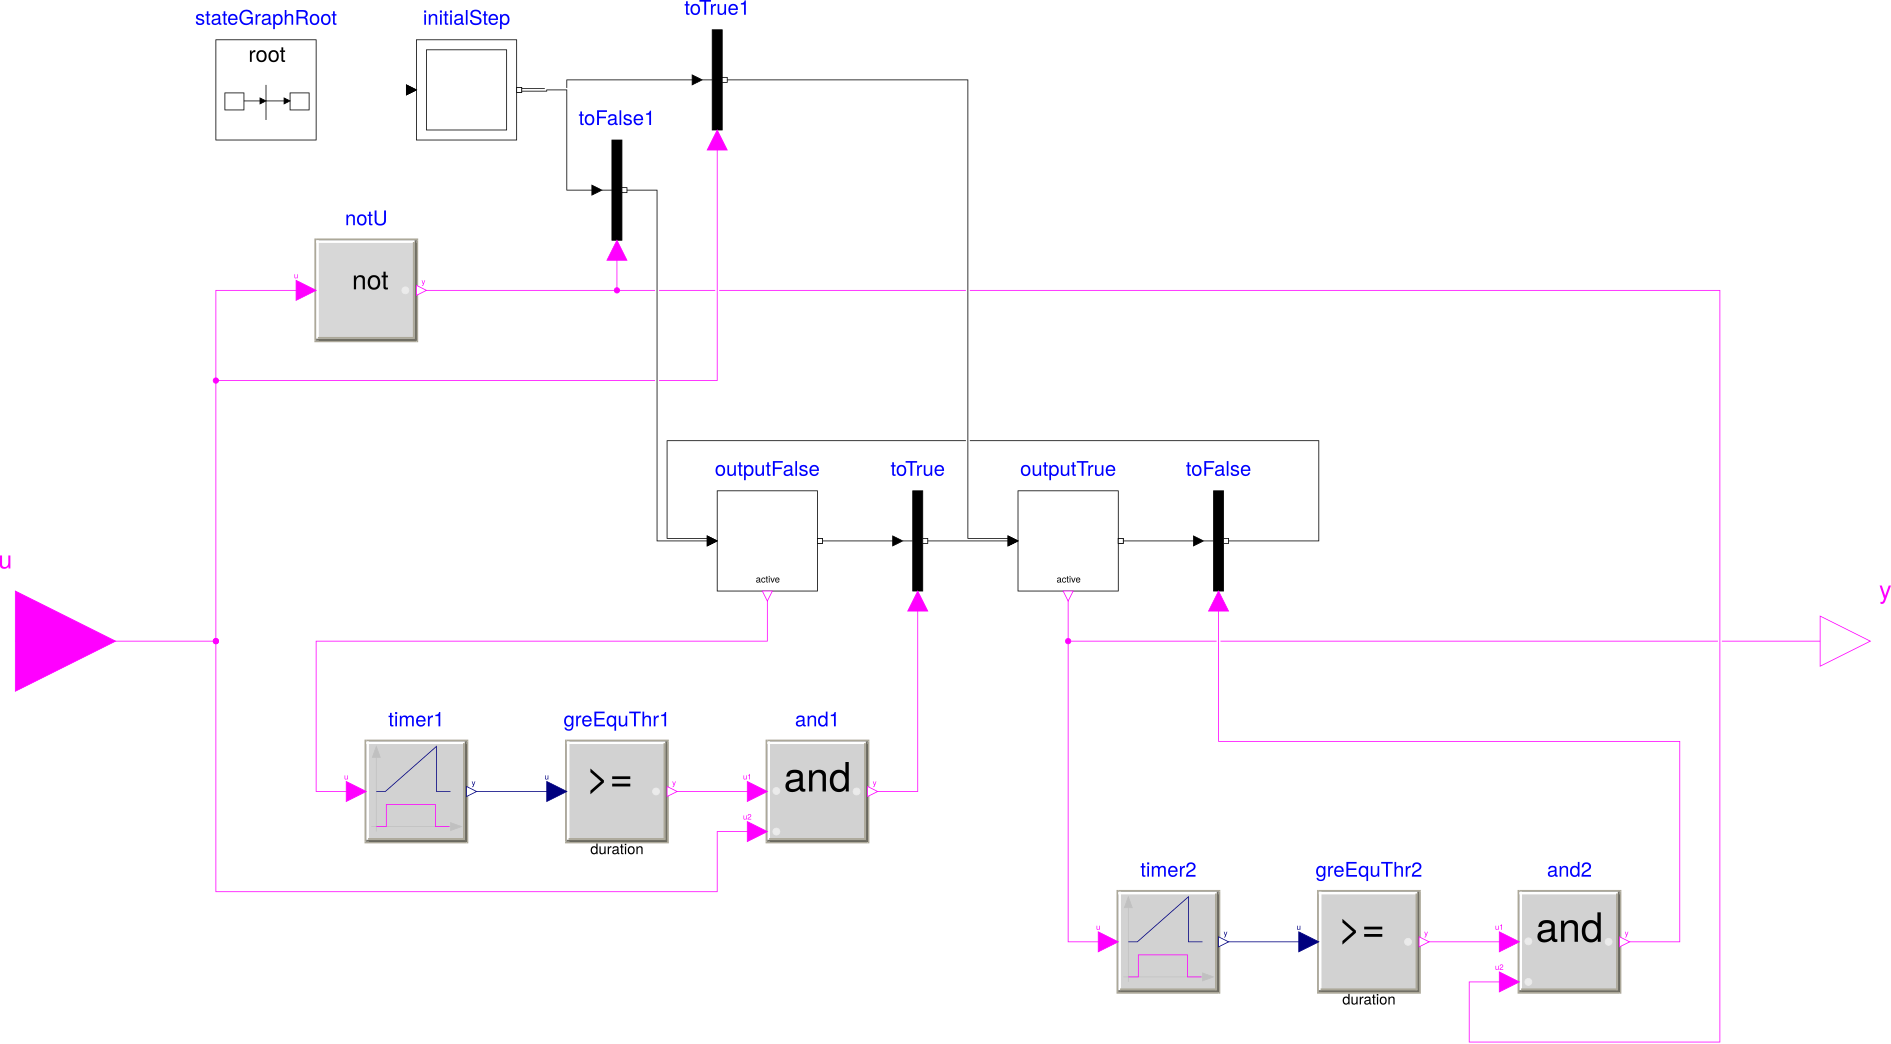 Input and output of the block